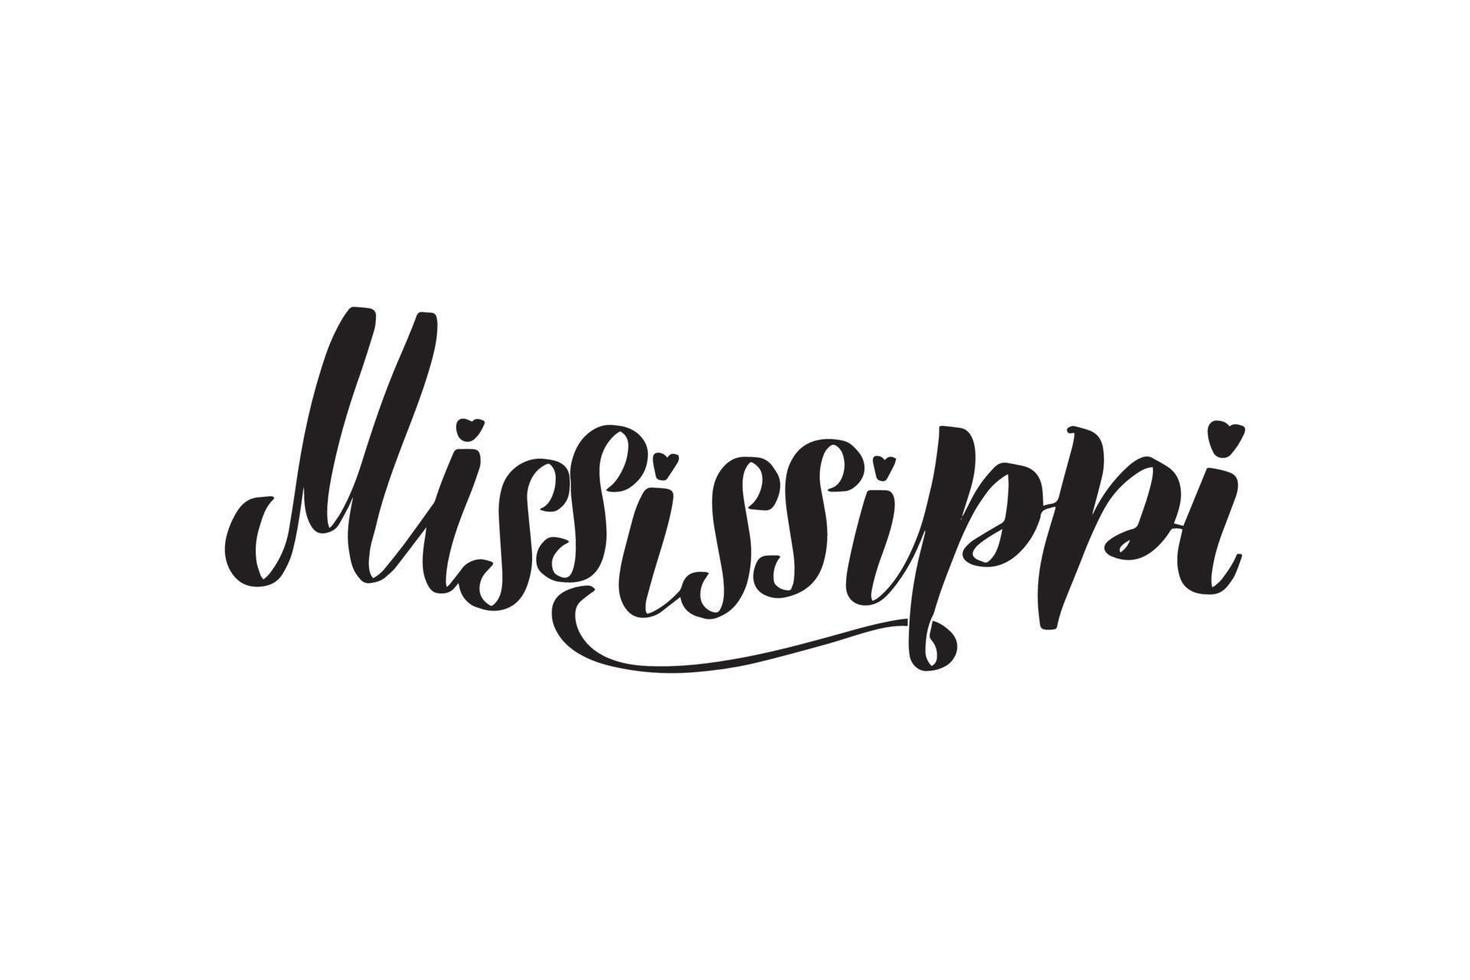 Inspirational handwritten brush lettering Mississippi. Vector calligraphy illustration isolated on white background. Typography for banners, badges, postcard, tshirt, prints, posters.